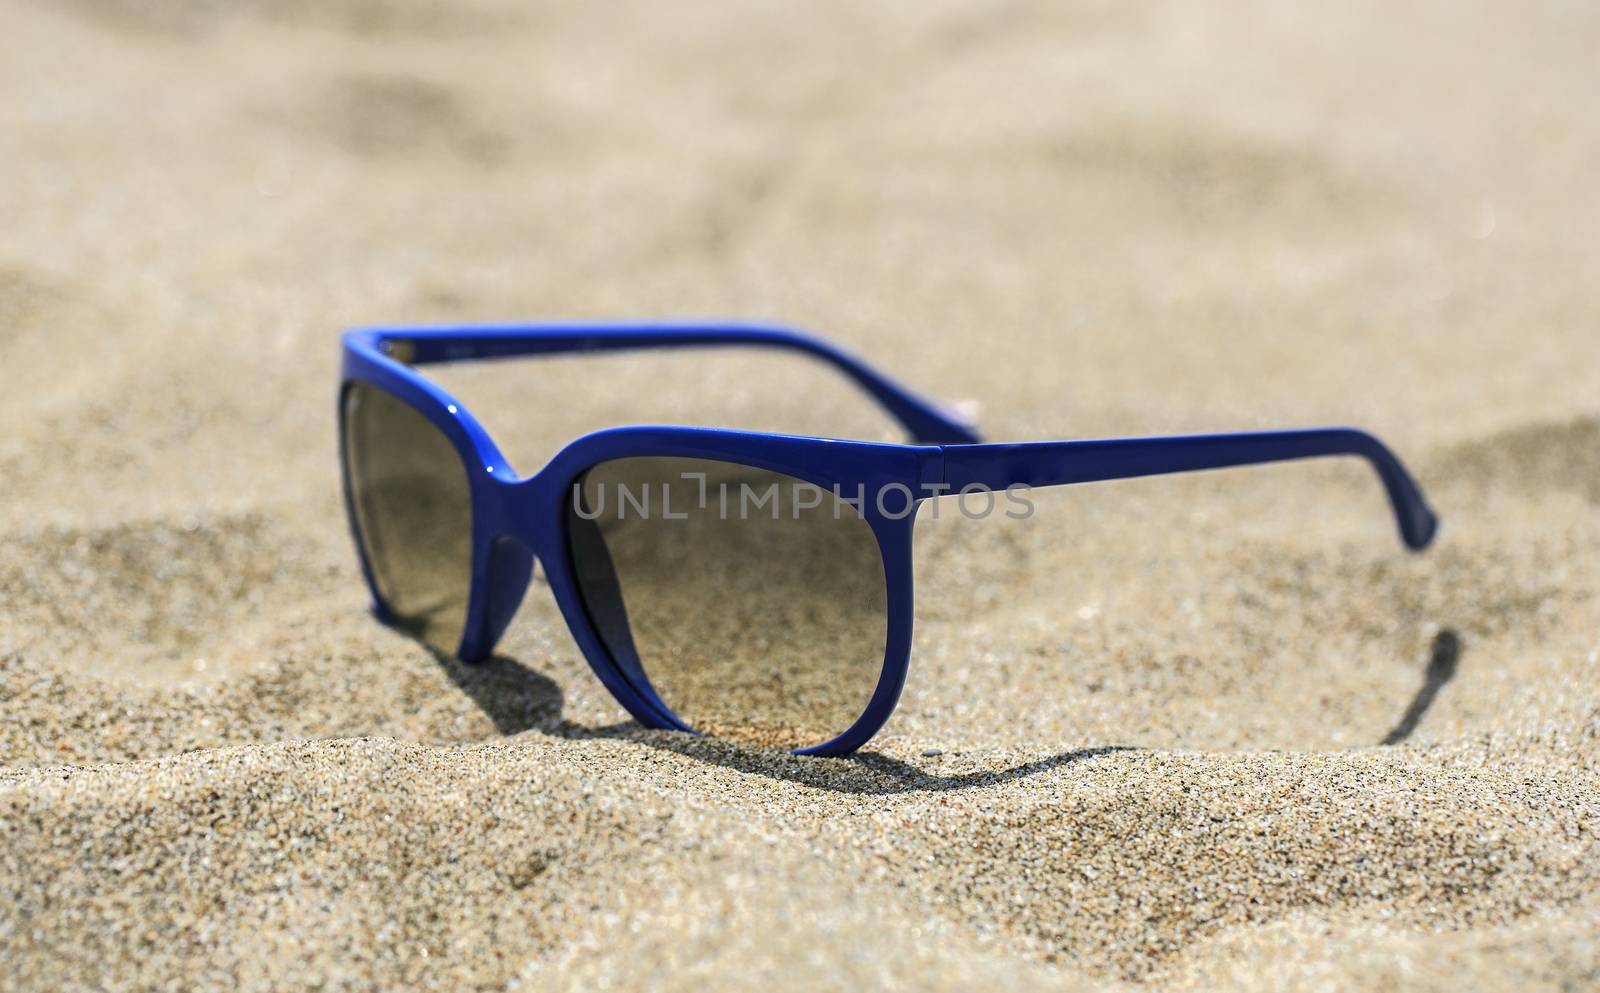 Blue sunglasses on the sand by nachrc2001